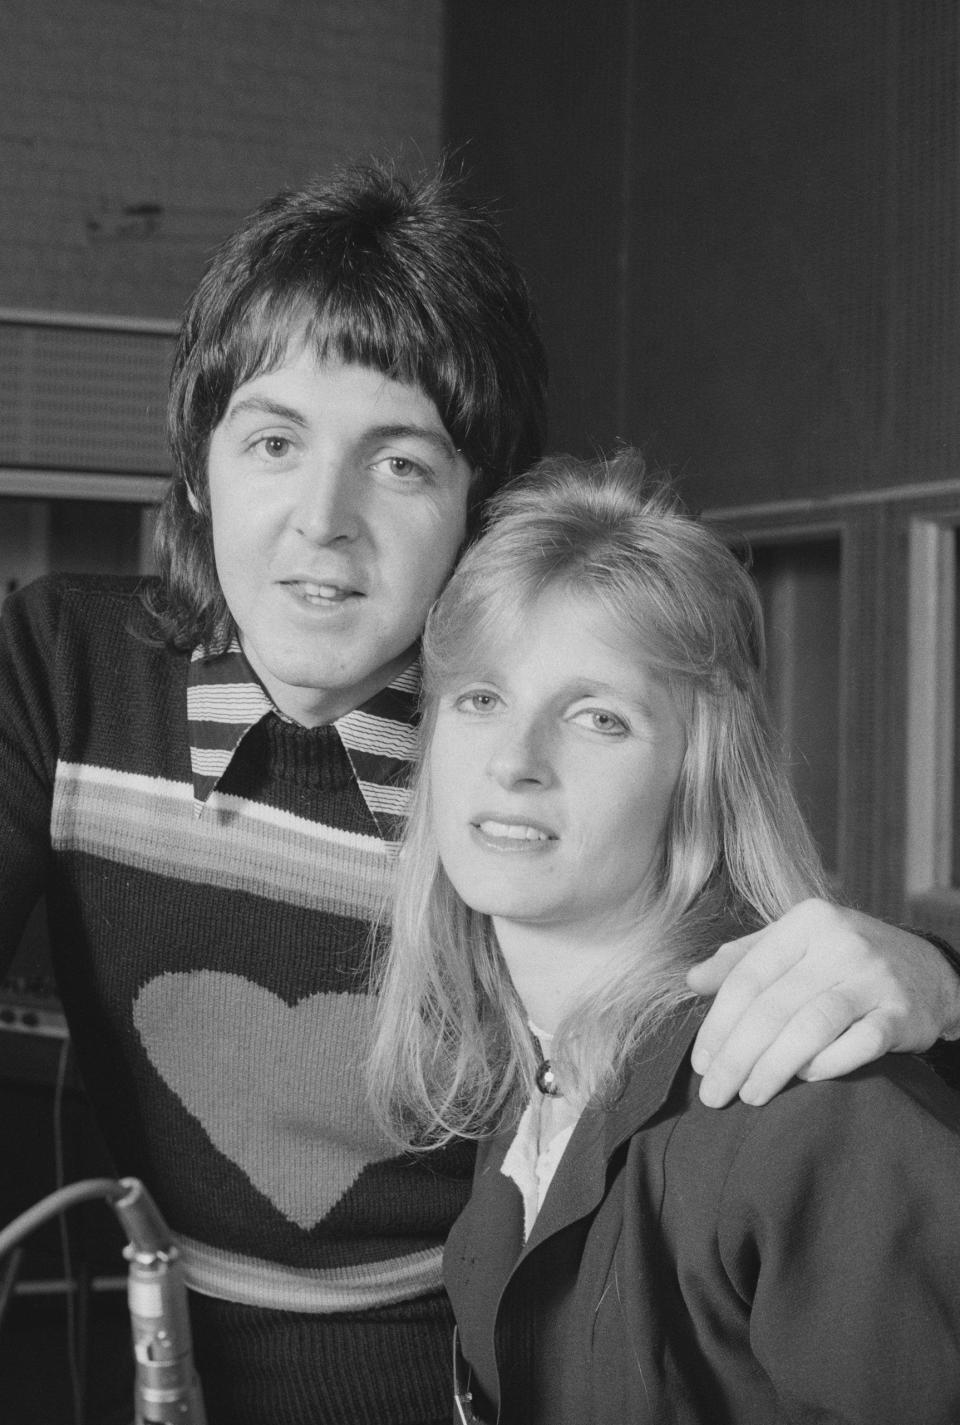 Paul McCartney and wife Linda divorced in 1998 after 29 years of marriage.